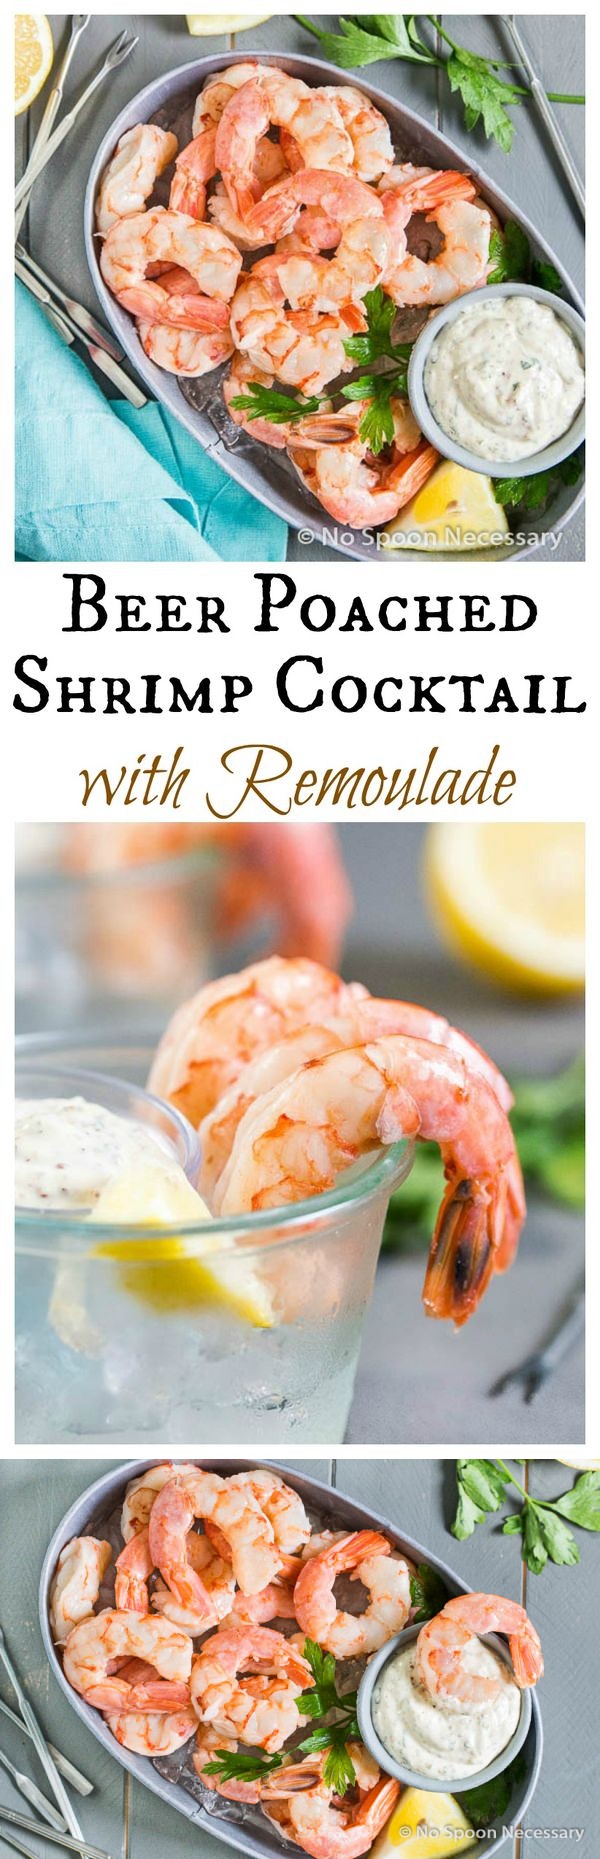 Perfect Beer Poached Shrimp Cocktail with Remoulade